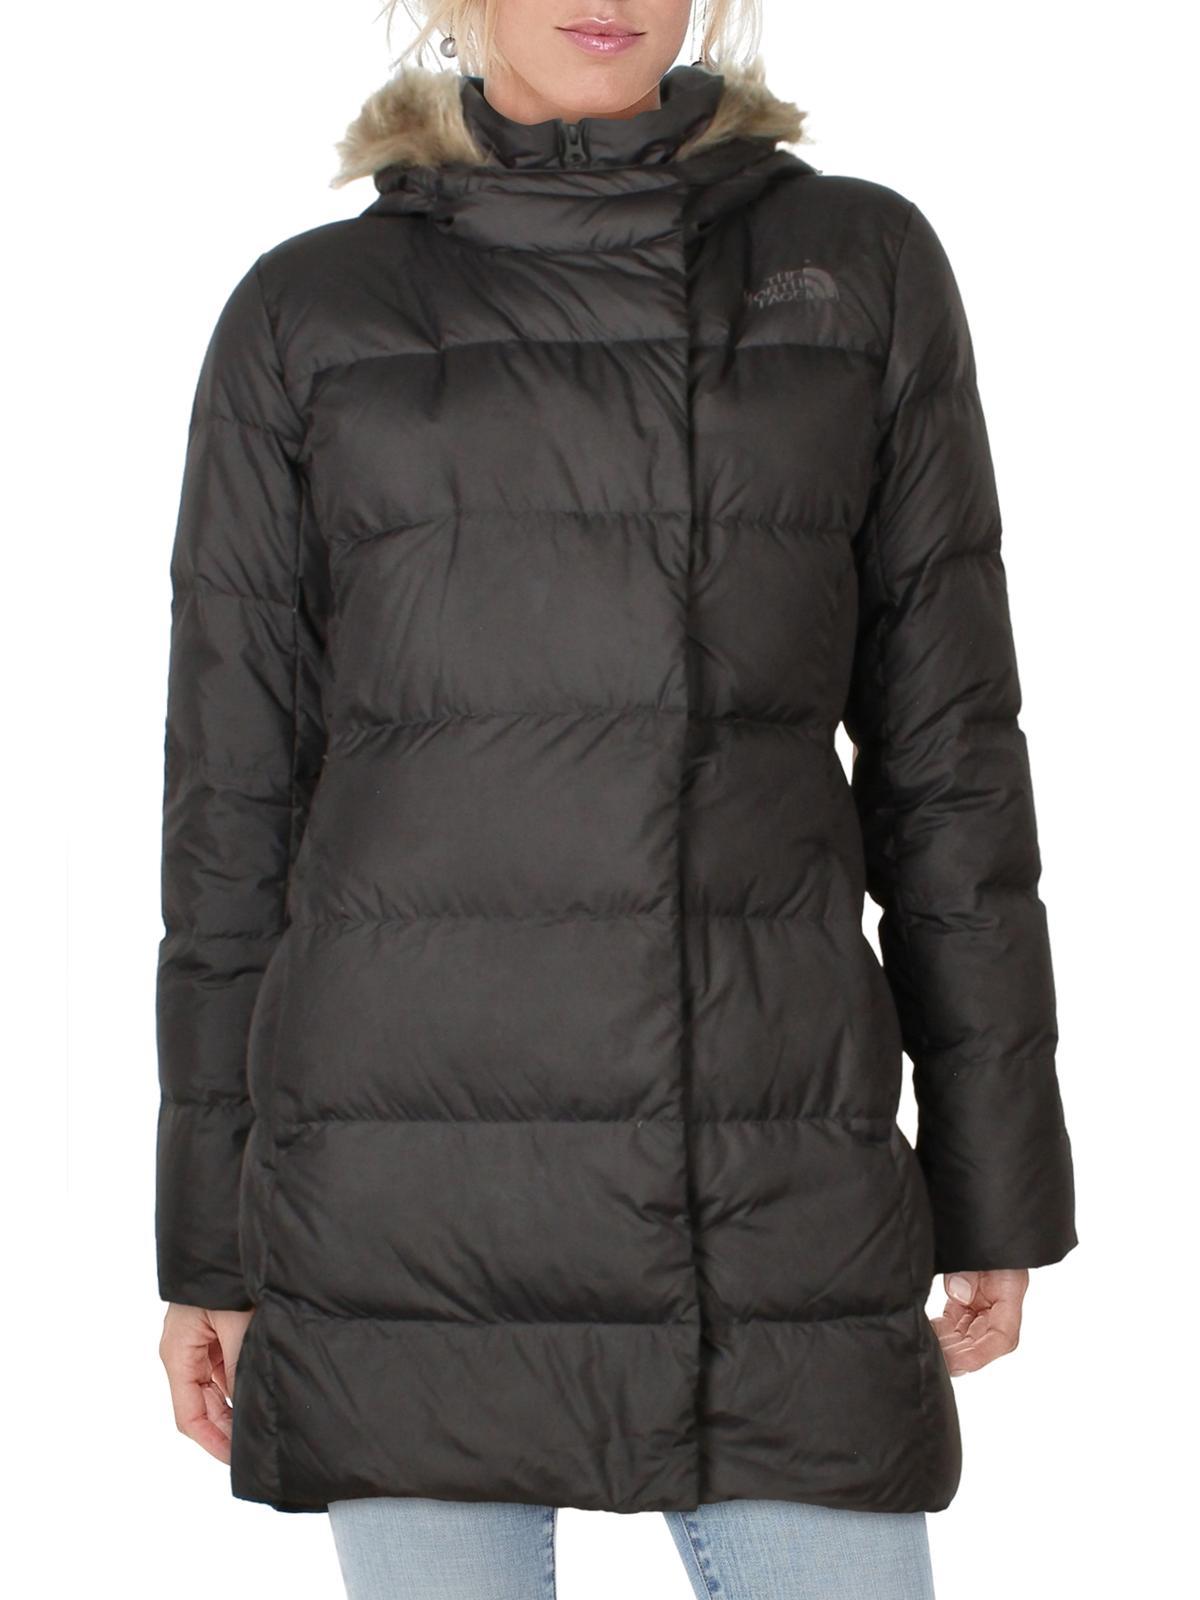 The North Face Dealio Down Slim Fit Parka Coat in Black | Lyst